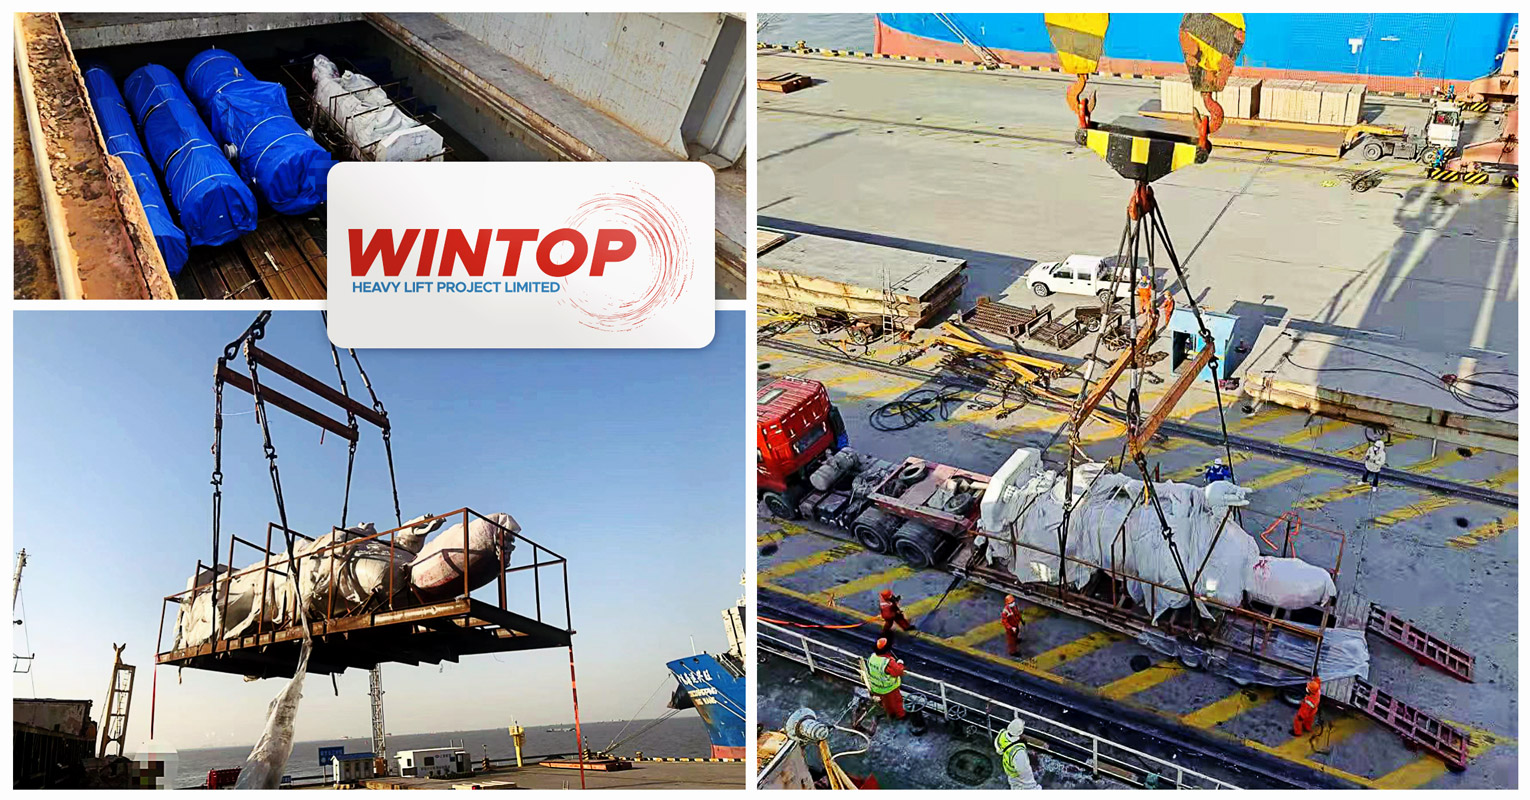 Wintop Heavy Lift Shipped a Guanyin Statue from Shanghai to Port Kelang